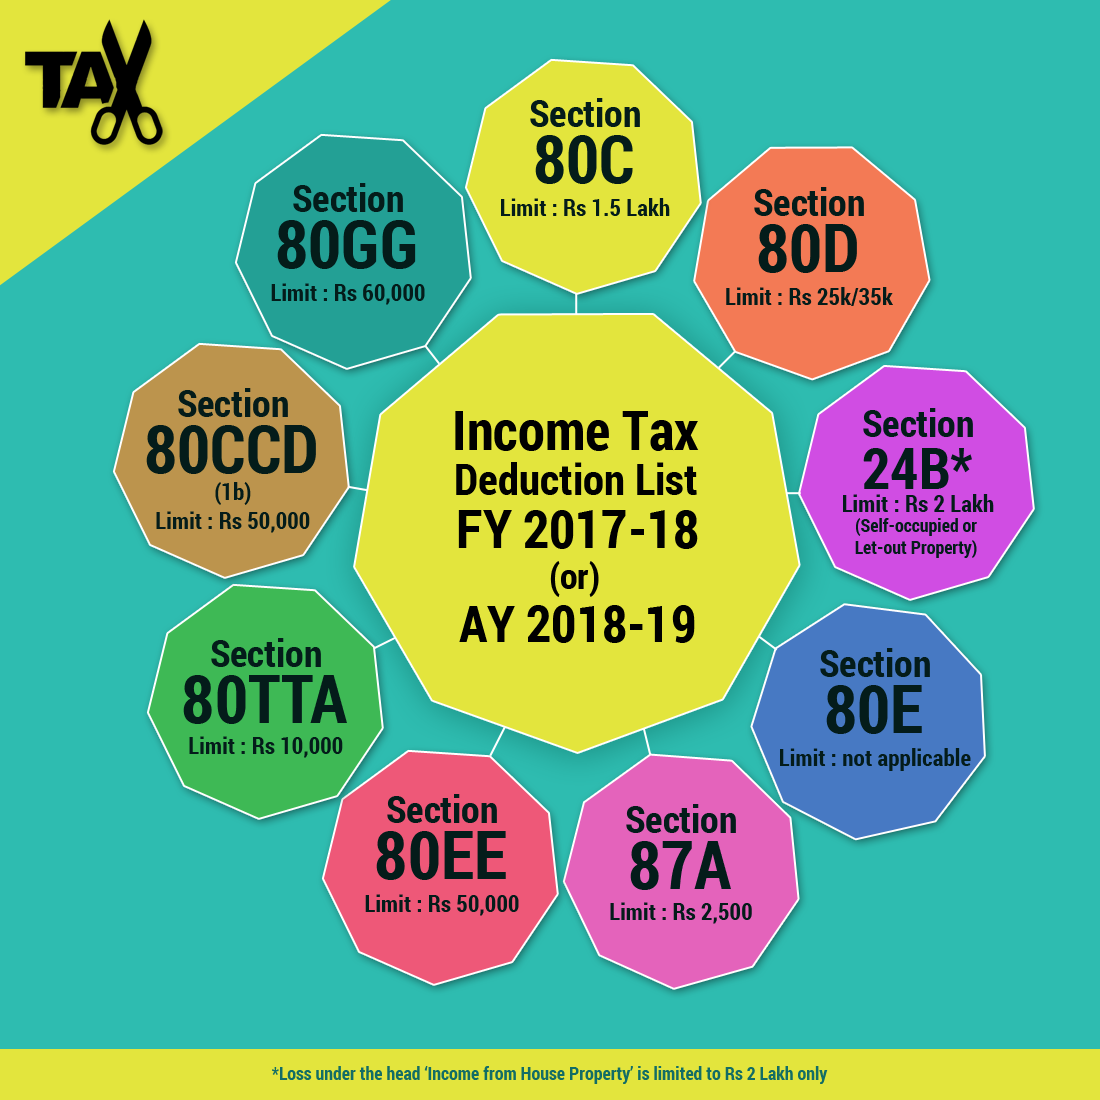 2021-taxes-for-retirees-explained-cardinal-guide